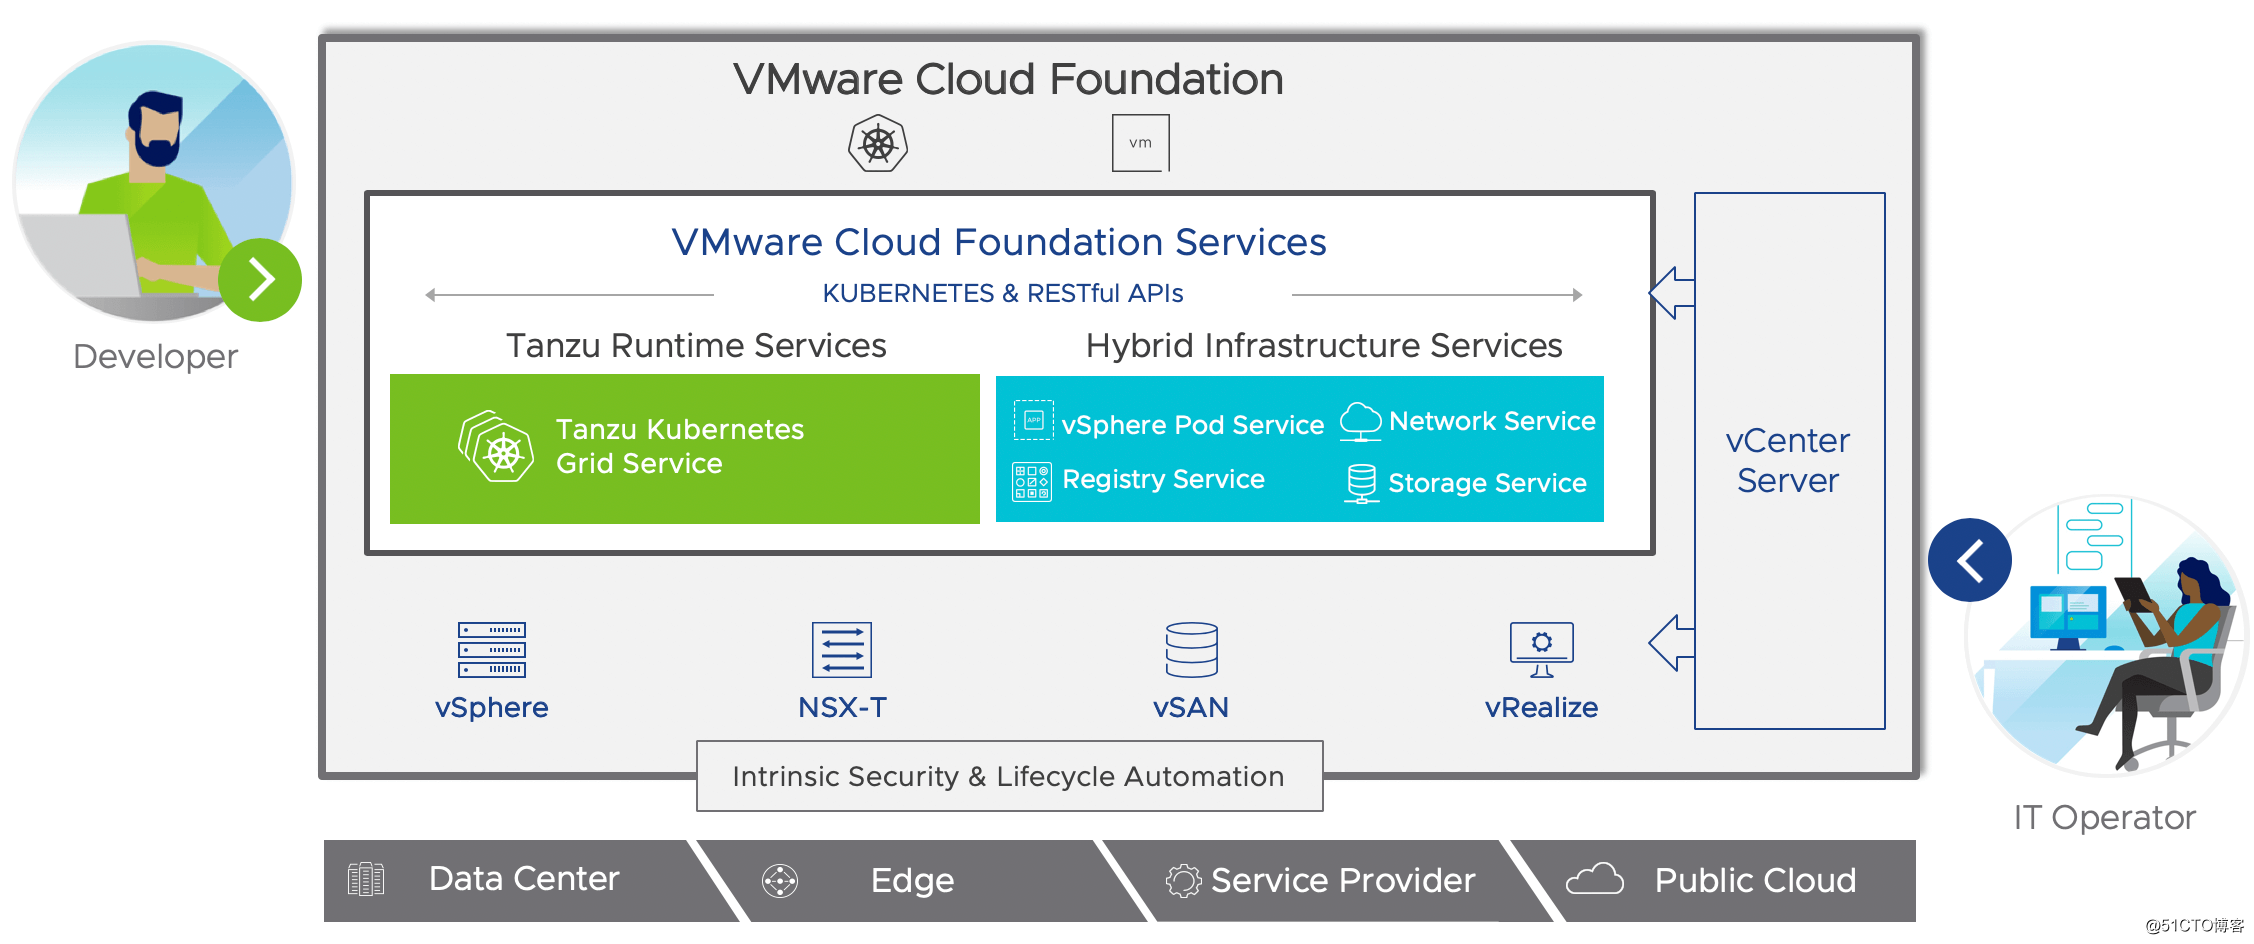 VMware-Cloud-Foundation-Services.png